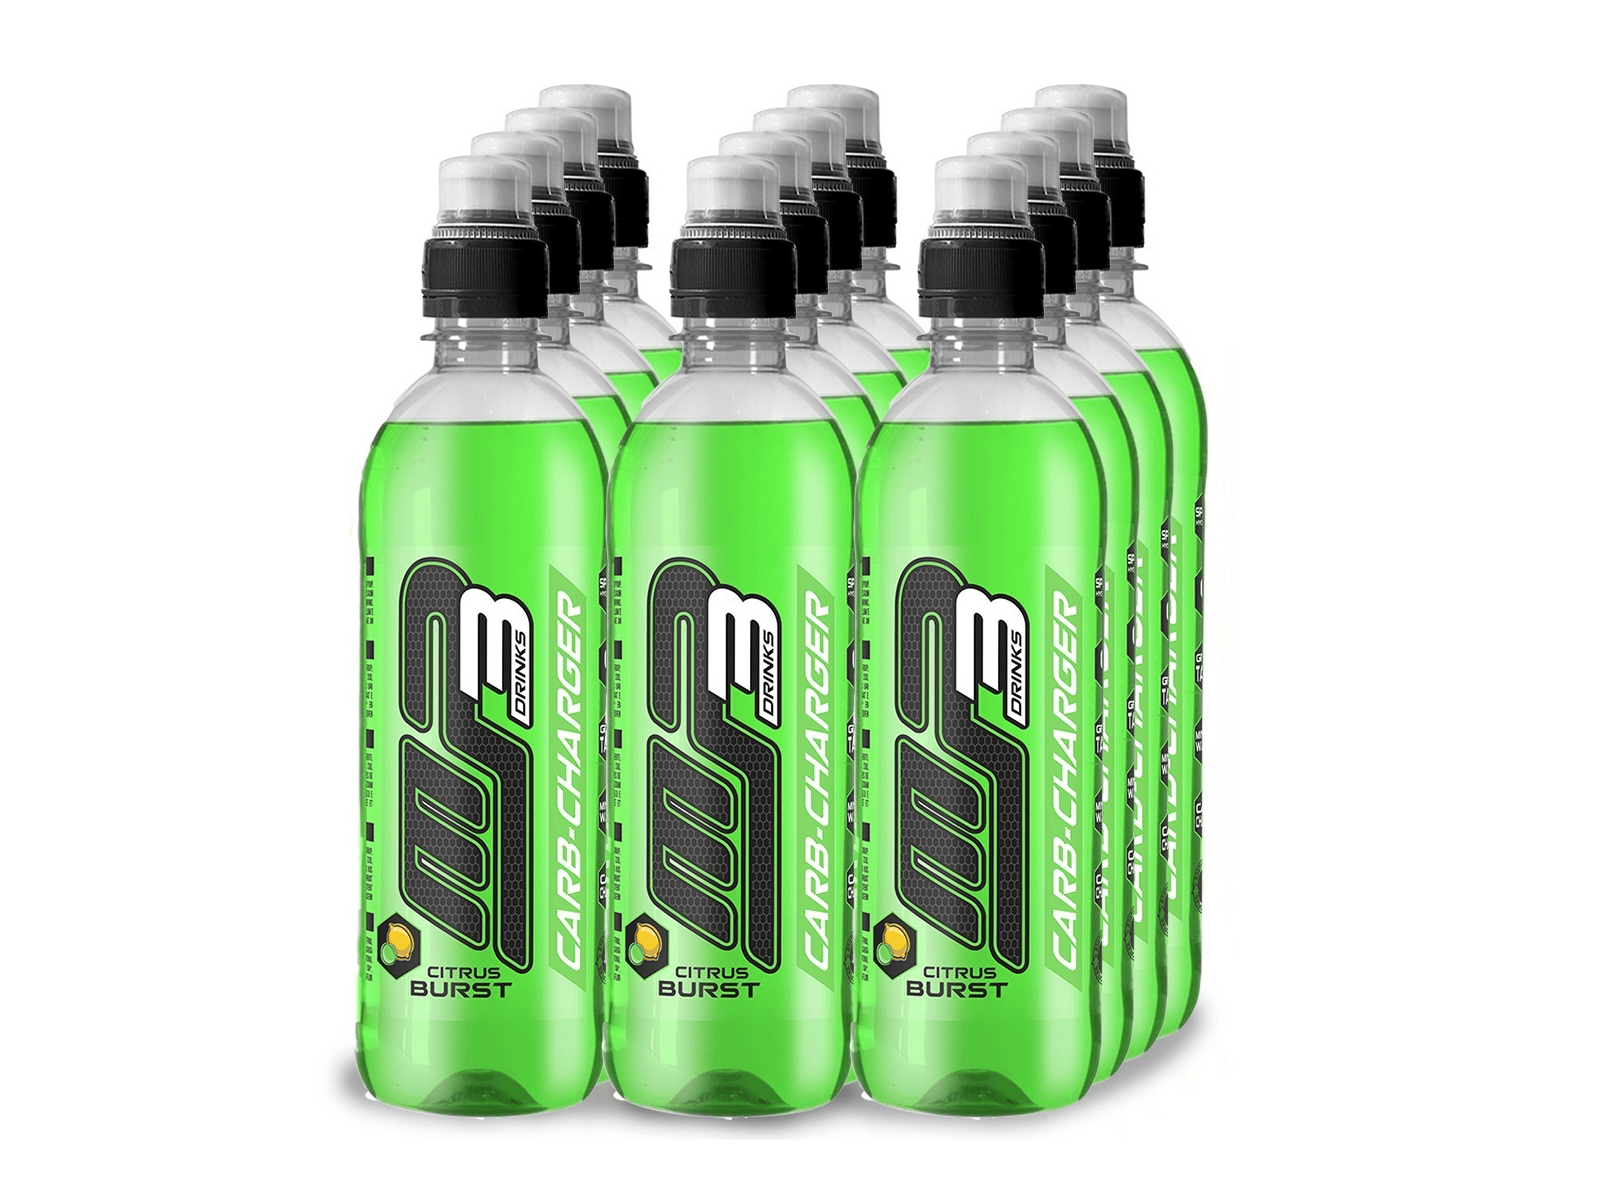 Carb-Charger (12-pack) (Citrus Burst - 12 x 500 ml) - MP3 DRINKS